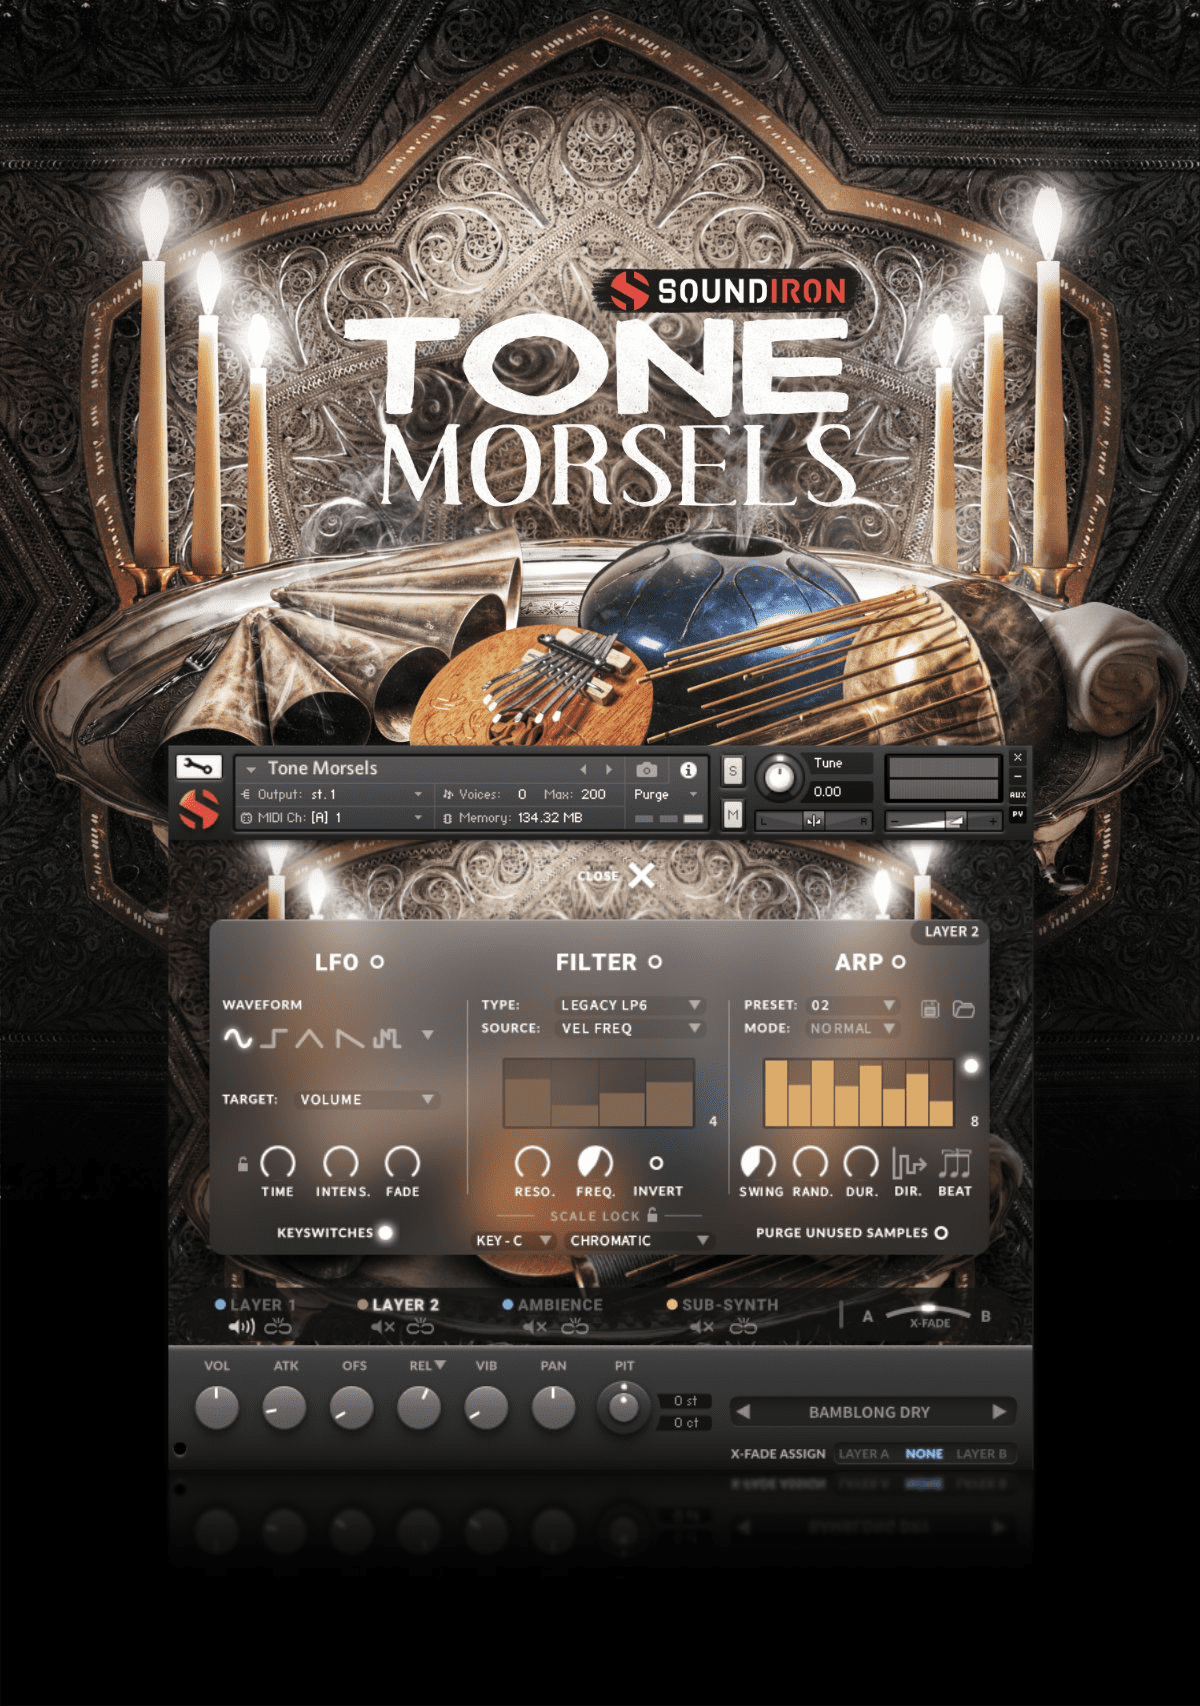 Tone Morsels by Soundiron – An Eclectic Collection Of Tuned Instruments